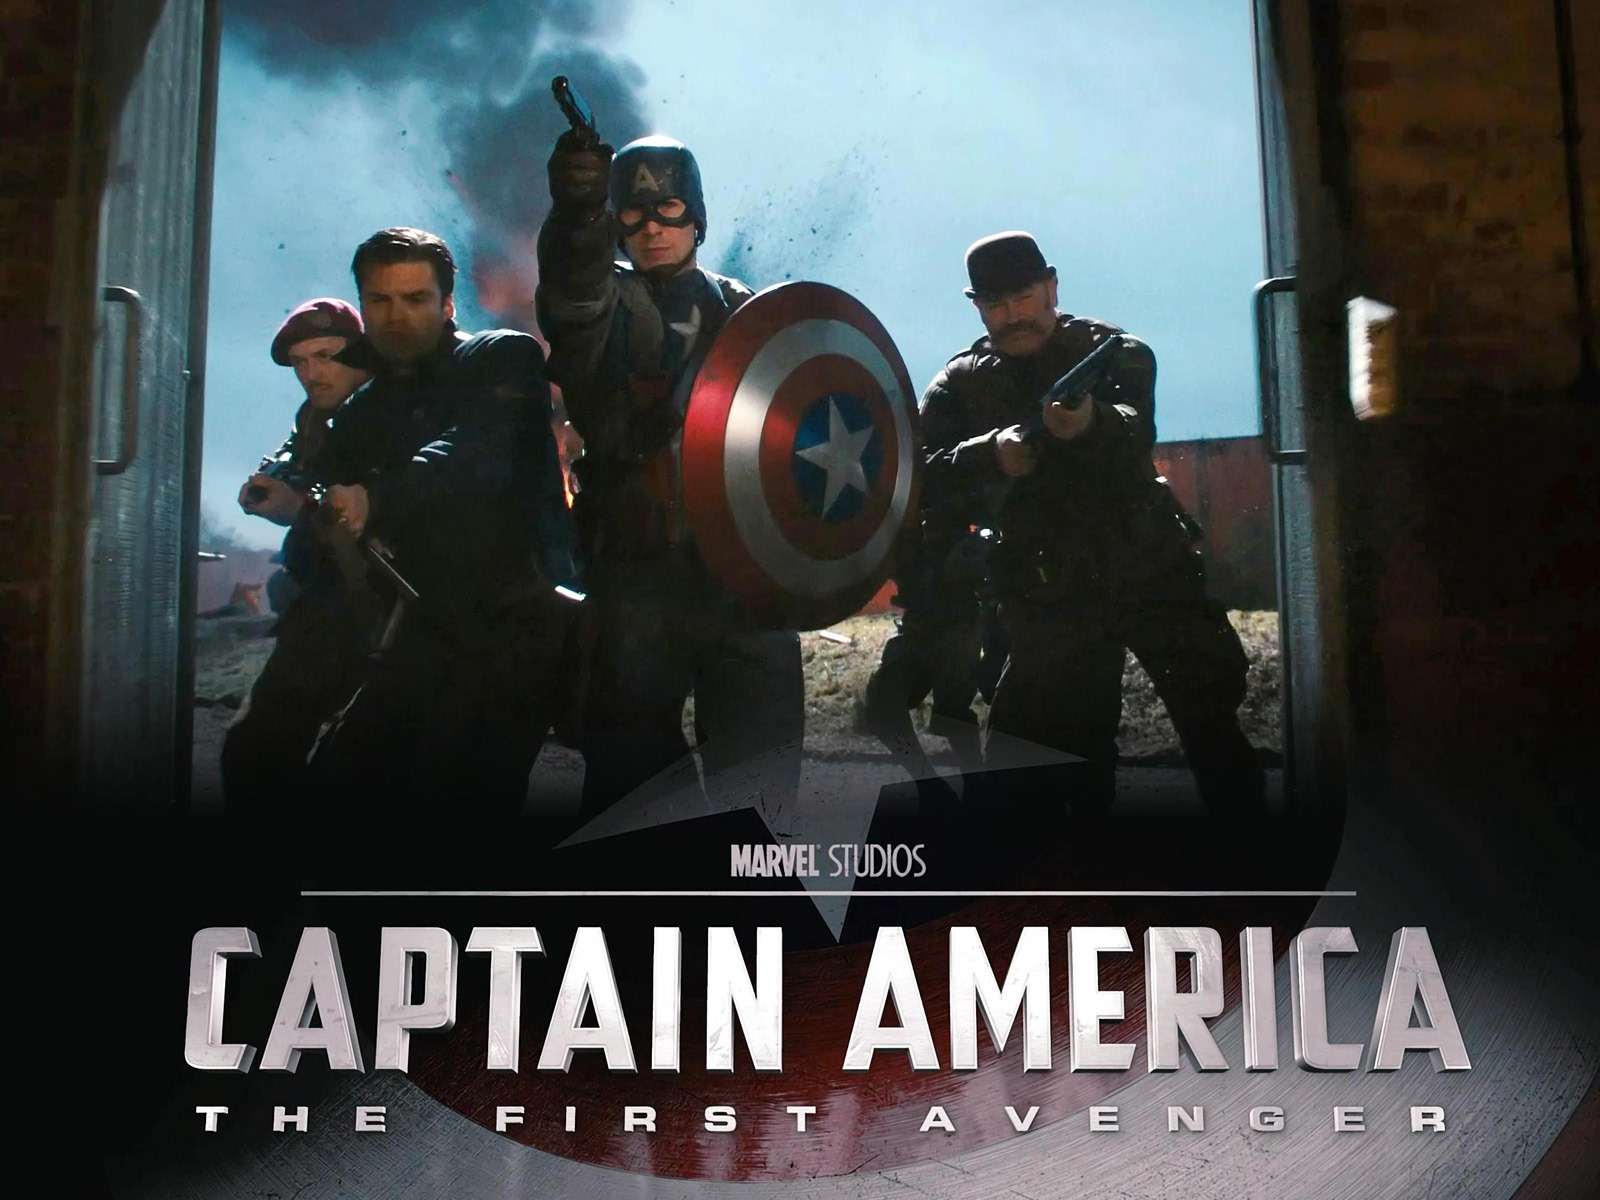 Captain America: The First Avenger wallpapers HD #9 - 1600x1200